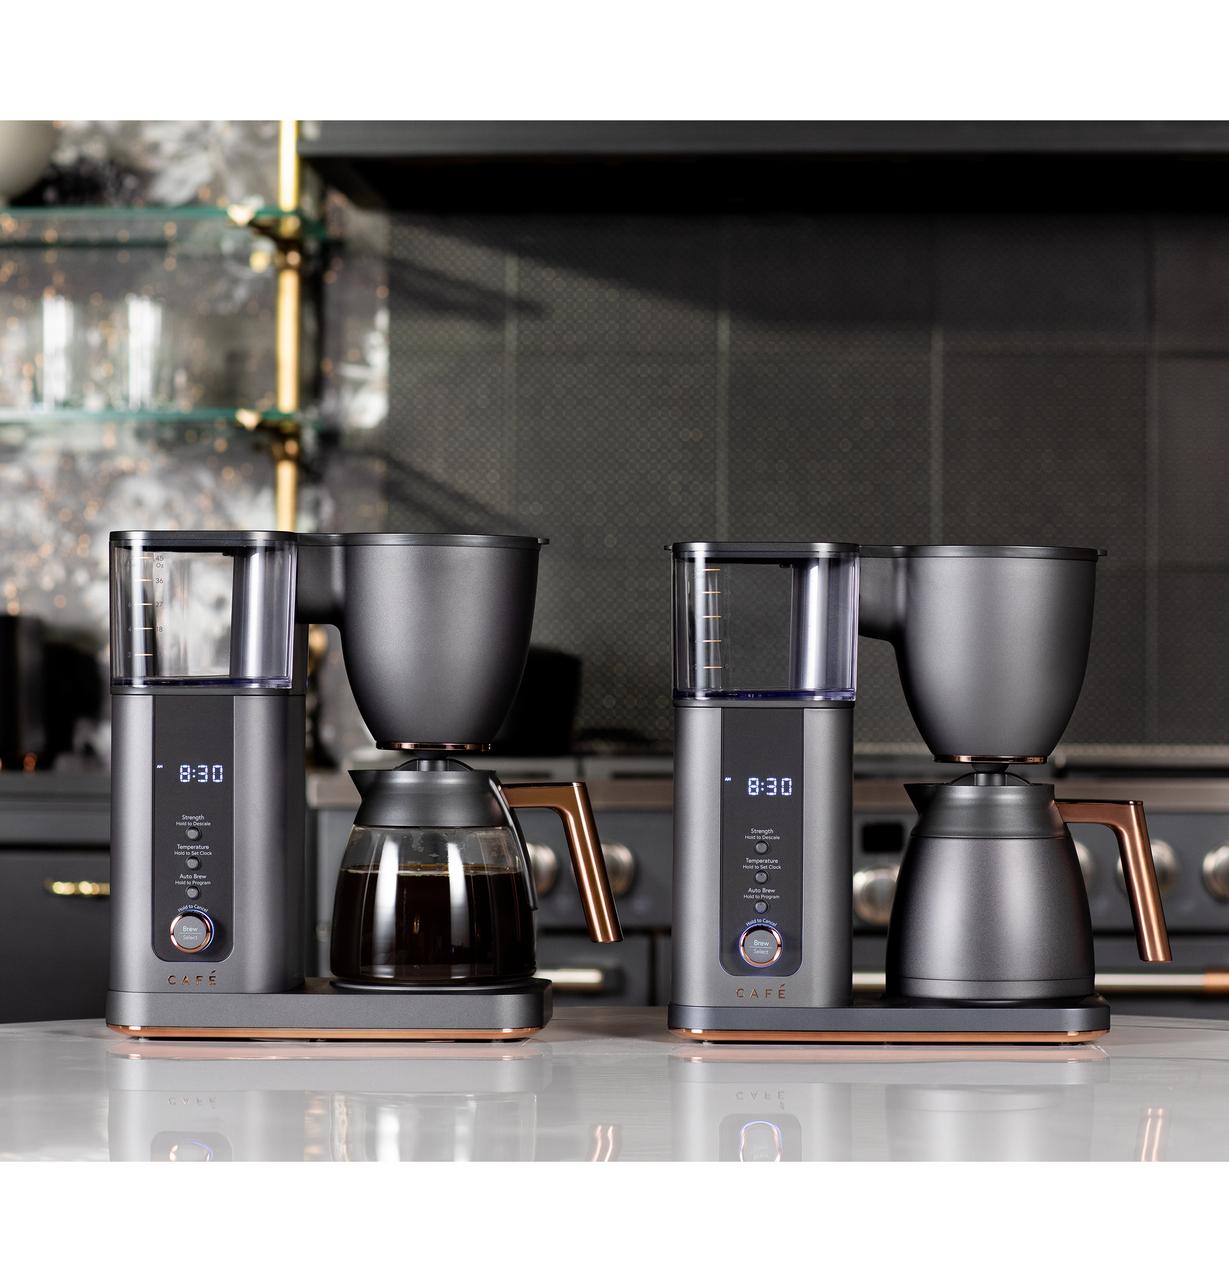 Cafe Caf(eback)™ Specialty Drip Coffee Maker with Glass Carafe